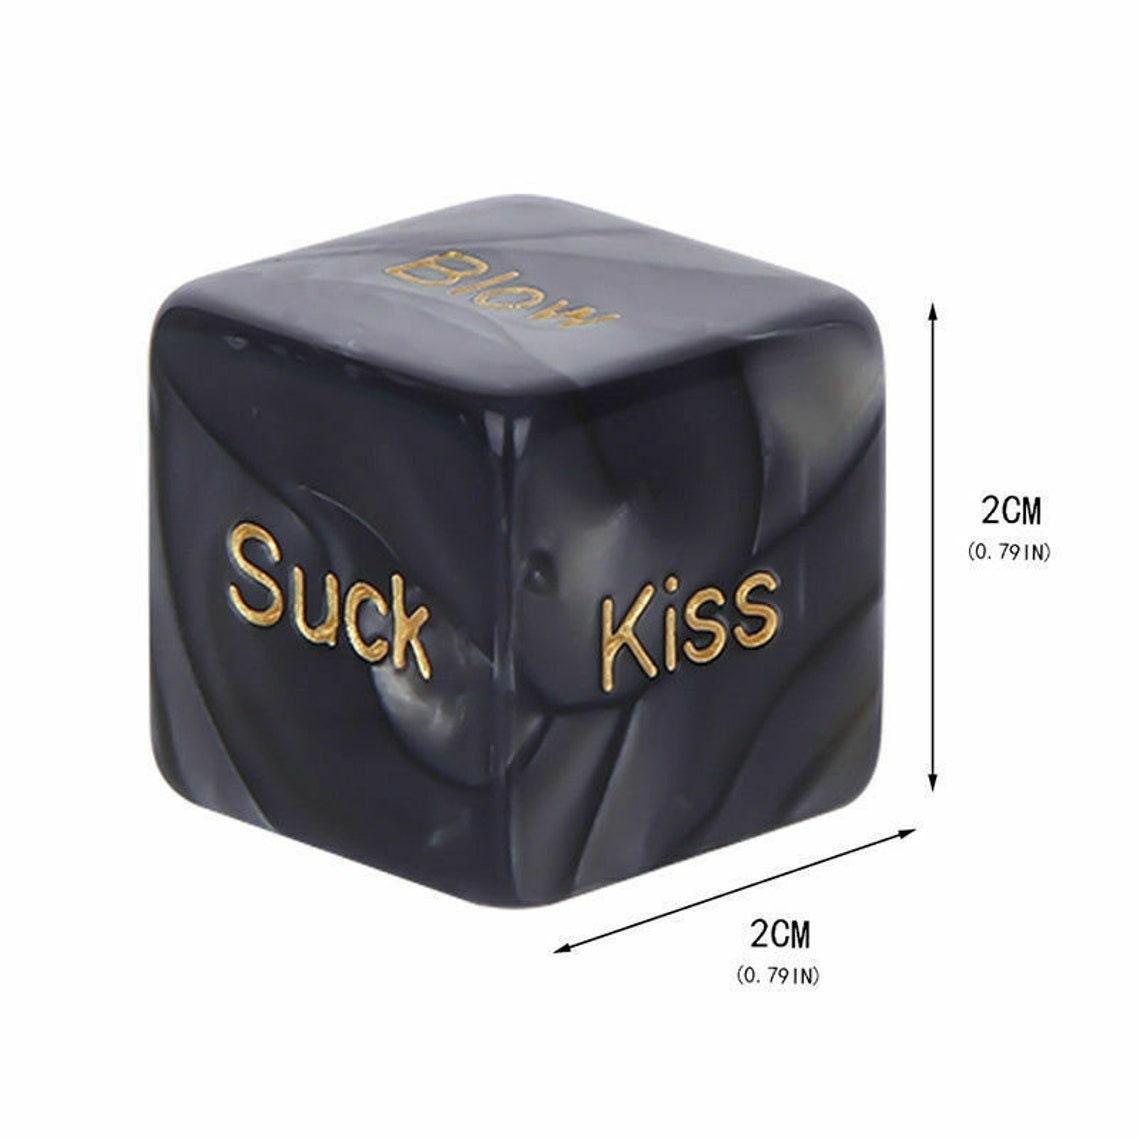 Positions Dice, 5 dice fun in the bedroom, bedroom game, fun game, husband birthday, wife birthday, anniversary gift, valentine’s day - 4Lovebirds